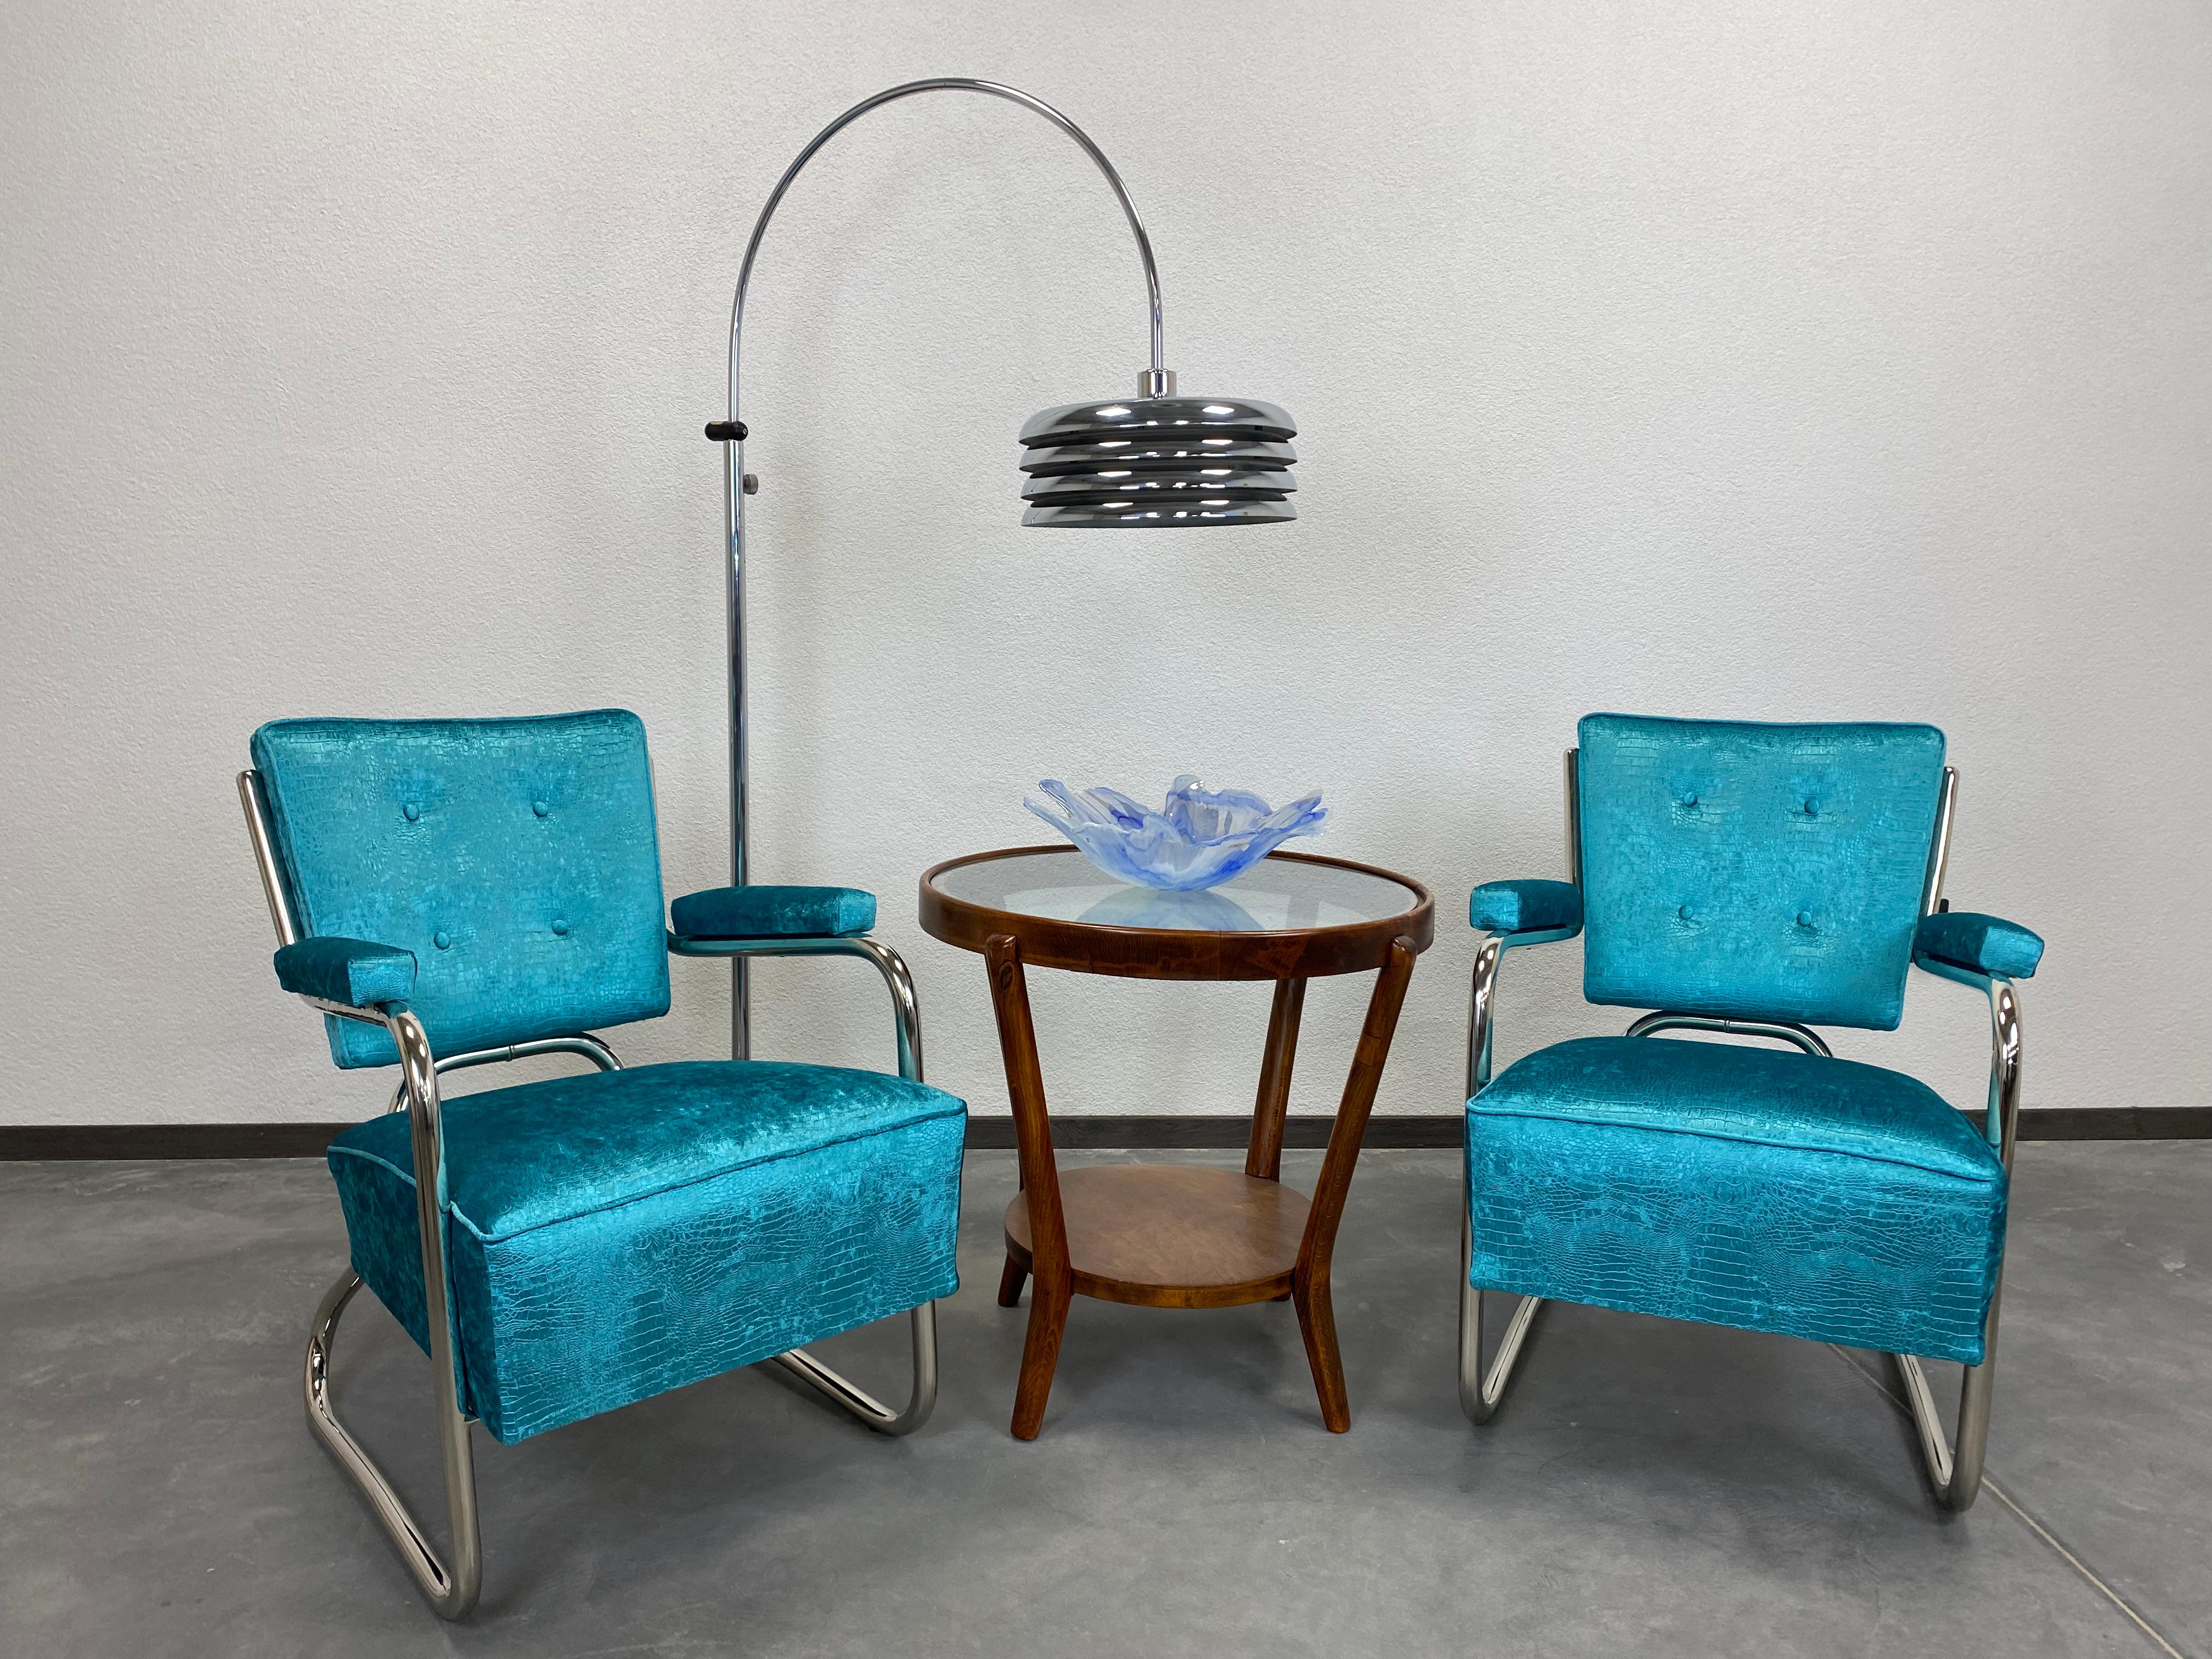 Extravagant chrome Bauhaus armchairs, completely restored, new chrome plating, very high quality patterned Spanish fabric.